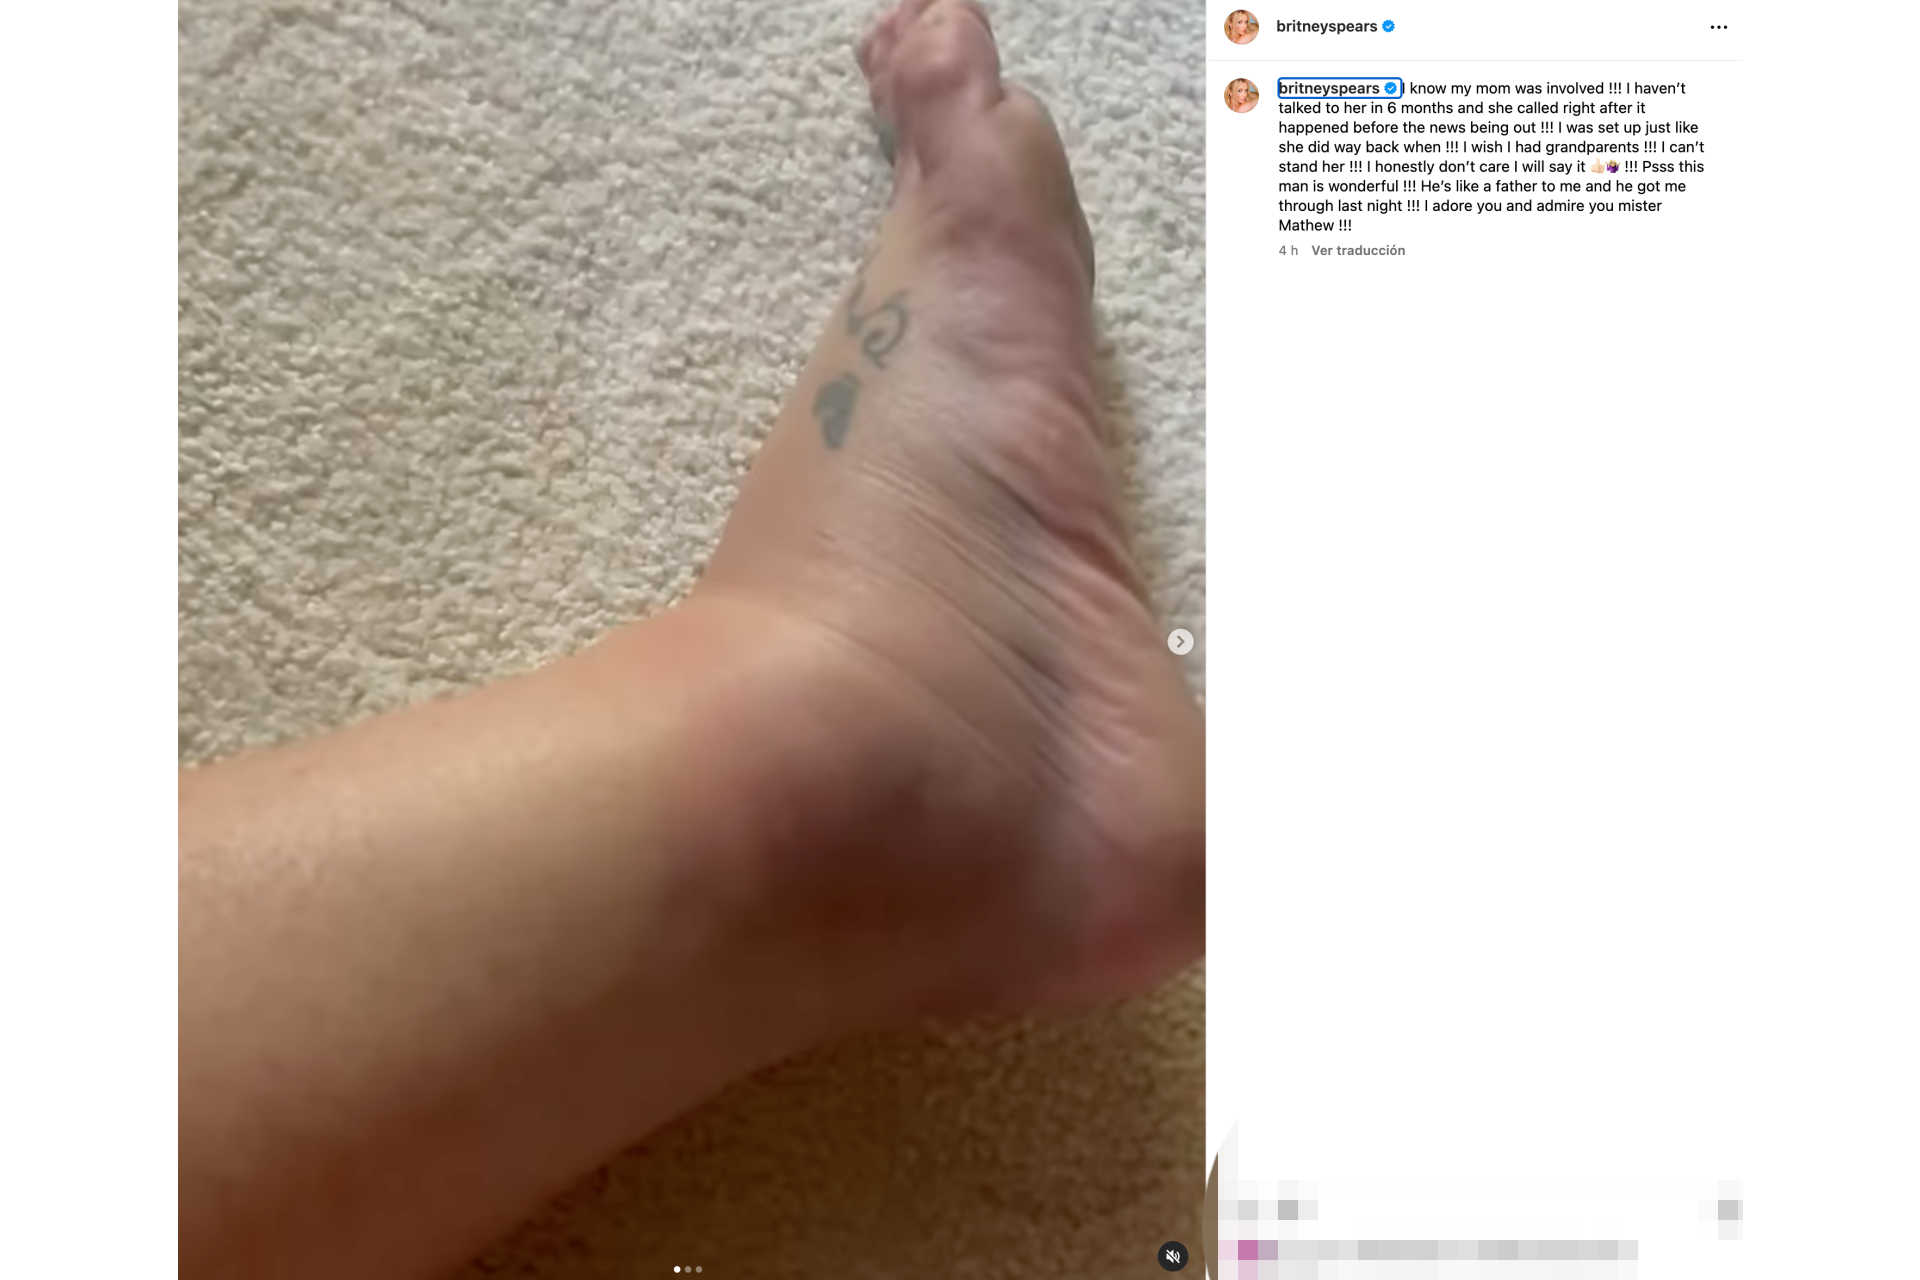 Britney's ankle